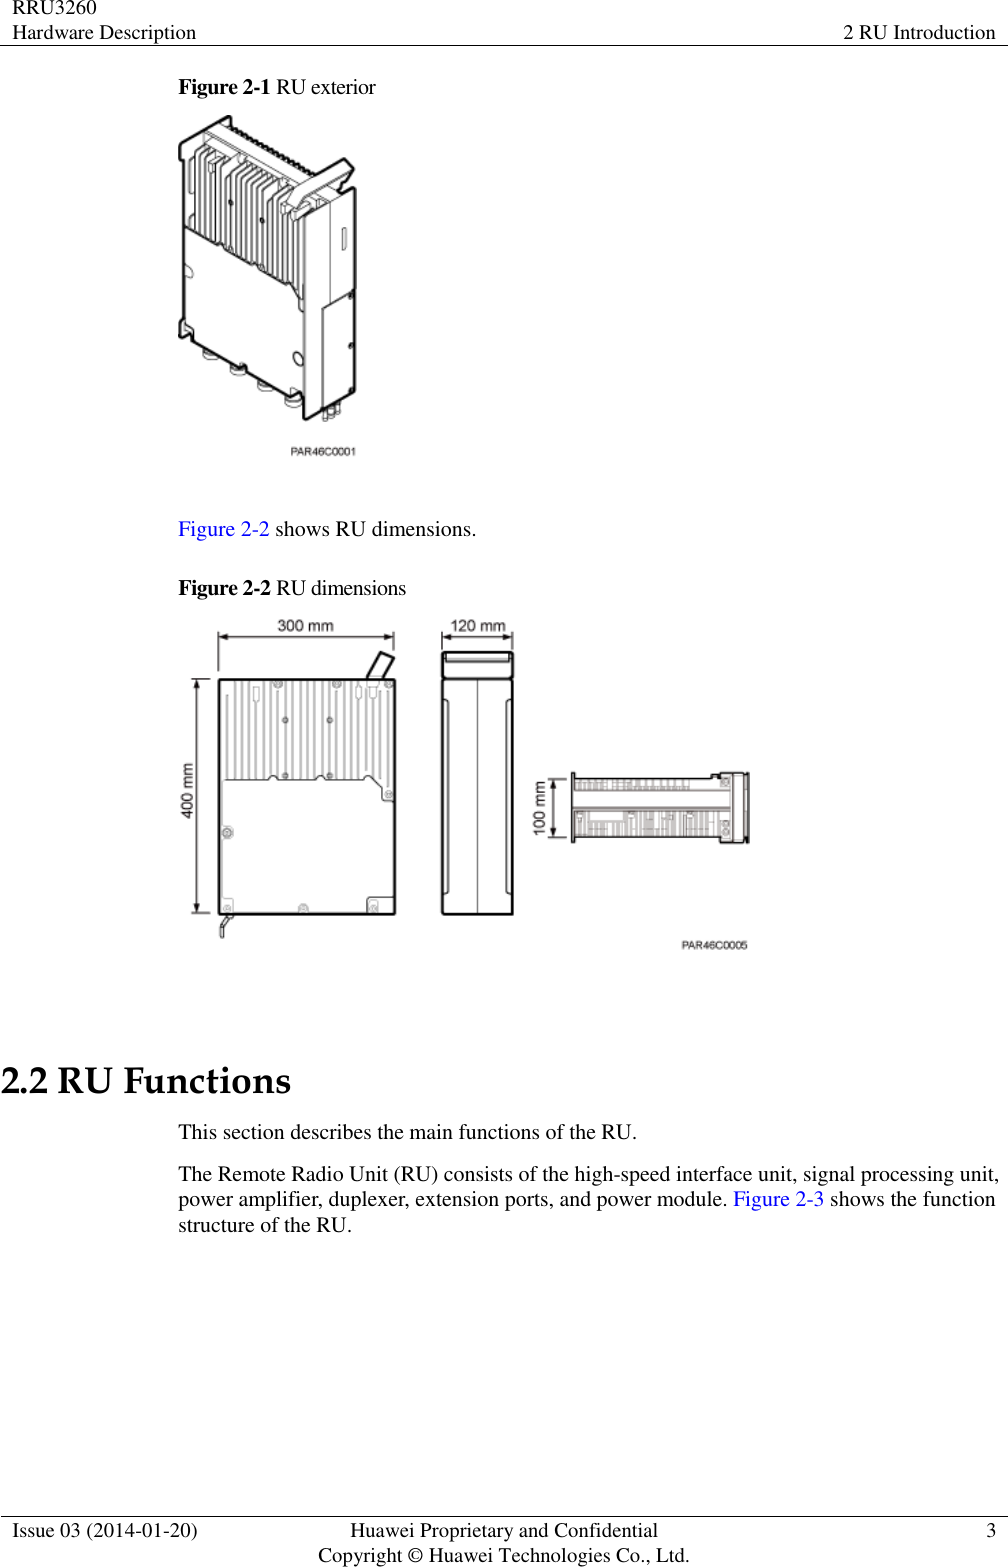 RRU3260 Hardware Description 2 RU Introduction  Issue 03 (2014-01-20) Huawei Proprietary and Confidential                                     Copyright © Huawei Technologies Co., Ltd. 3  Figure 2-1 RU exterior   Figure 2-2 shows RU dimensions. Figure 2-2 RU dimensions   2.2 RU Functions This section describes the main functions of the RU. The Remote Radio Unit (RU) consists of the high-speed interface unit, signal processing unit, power amplifier, duplexer, extension ports, and power module. Figure 2-3 shows the function structure of the RU. 